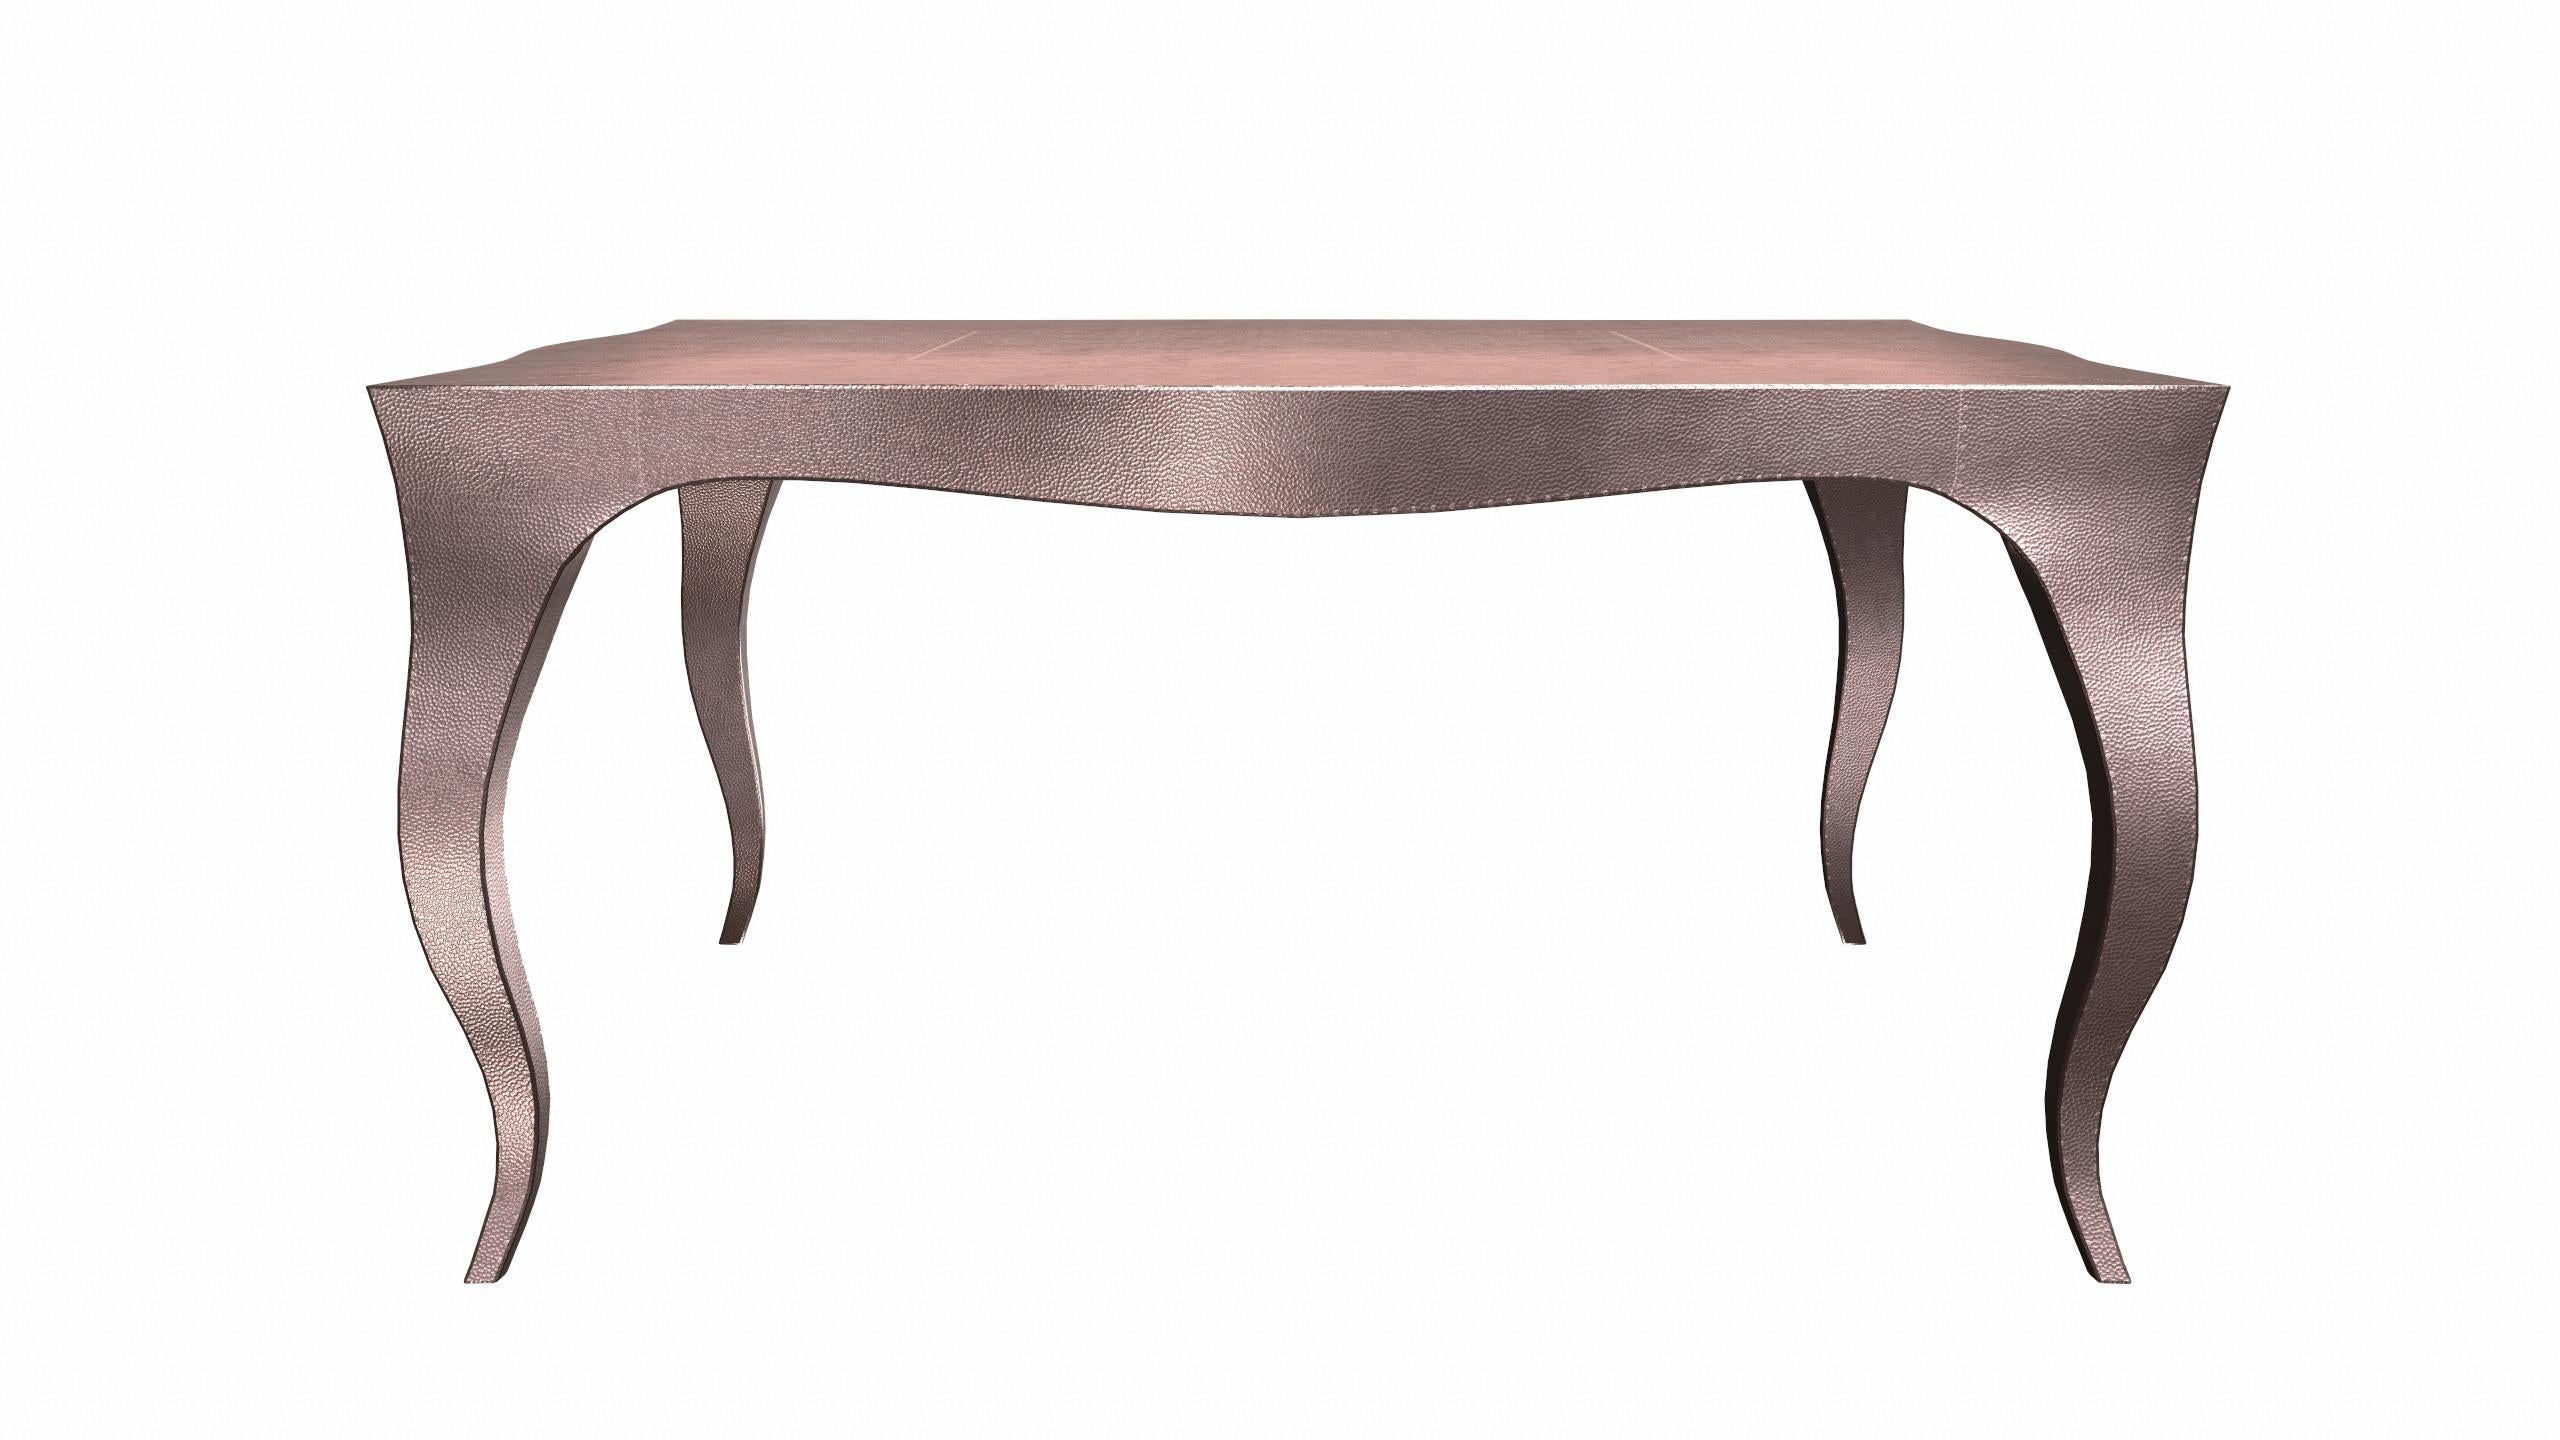 American Louise Art Deco Nesting Tables and Stacking Tables Mid. Hammered Copper by Paul For Sale